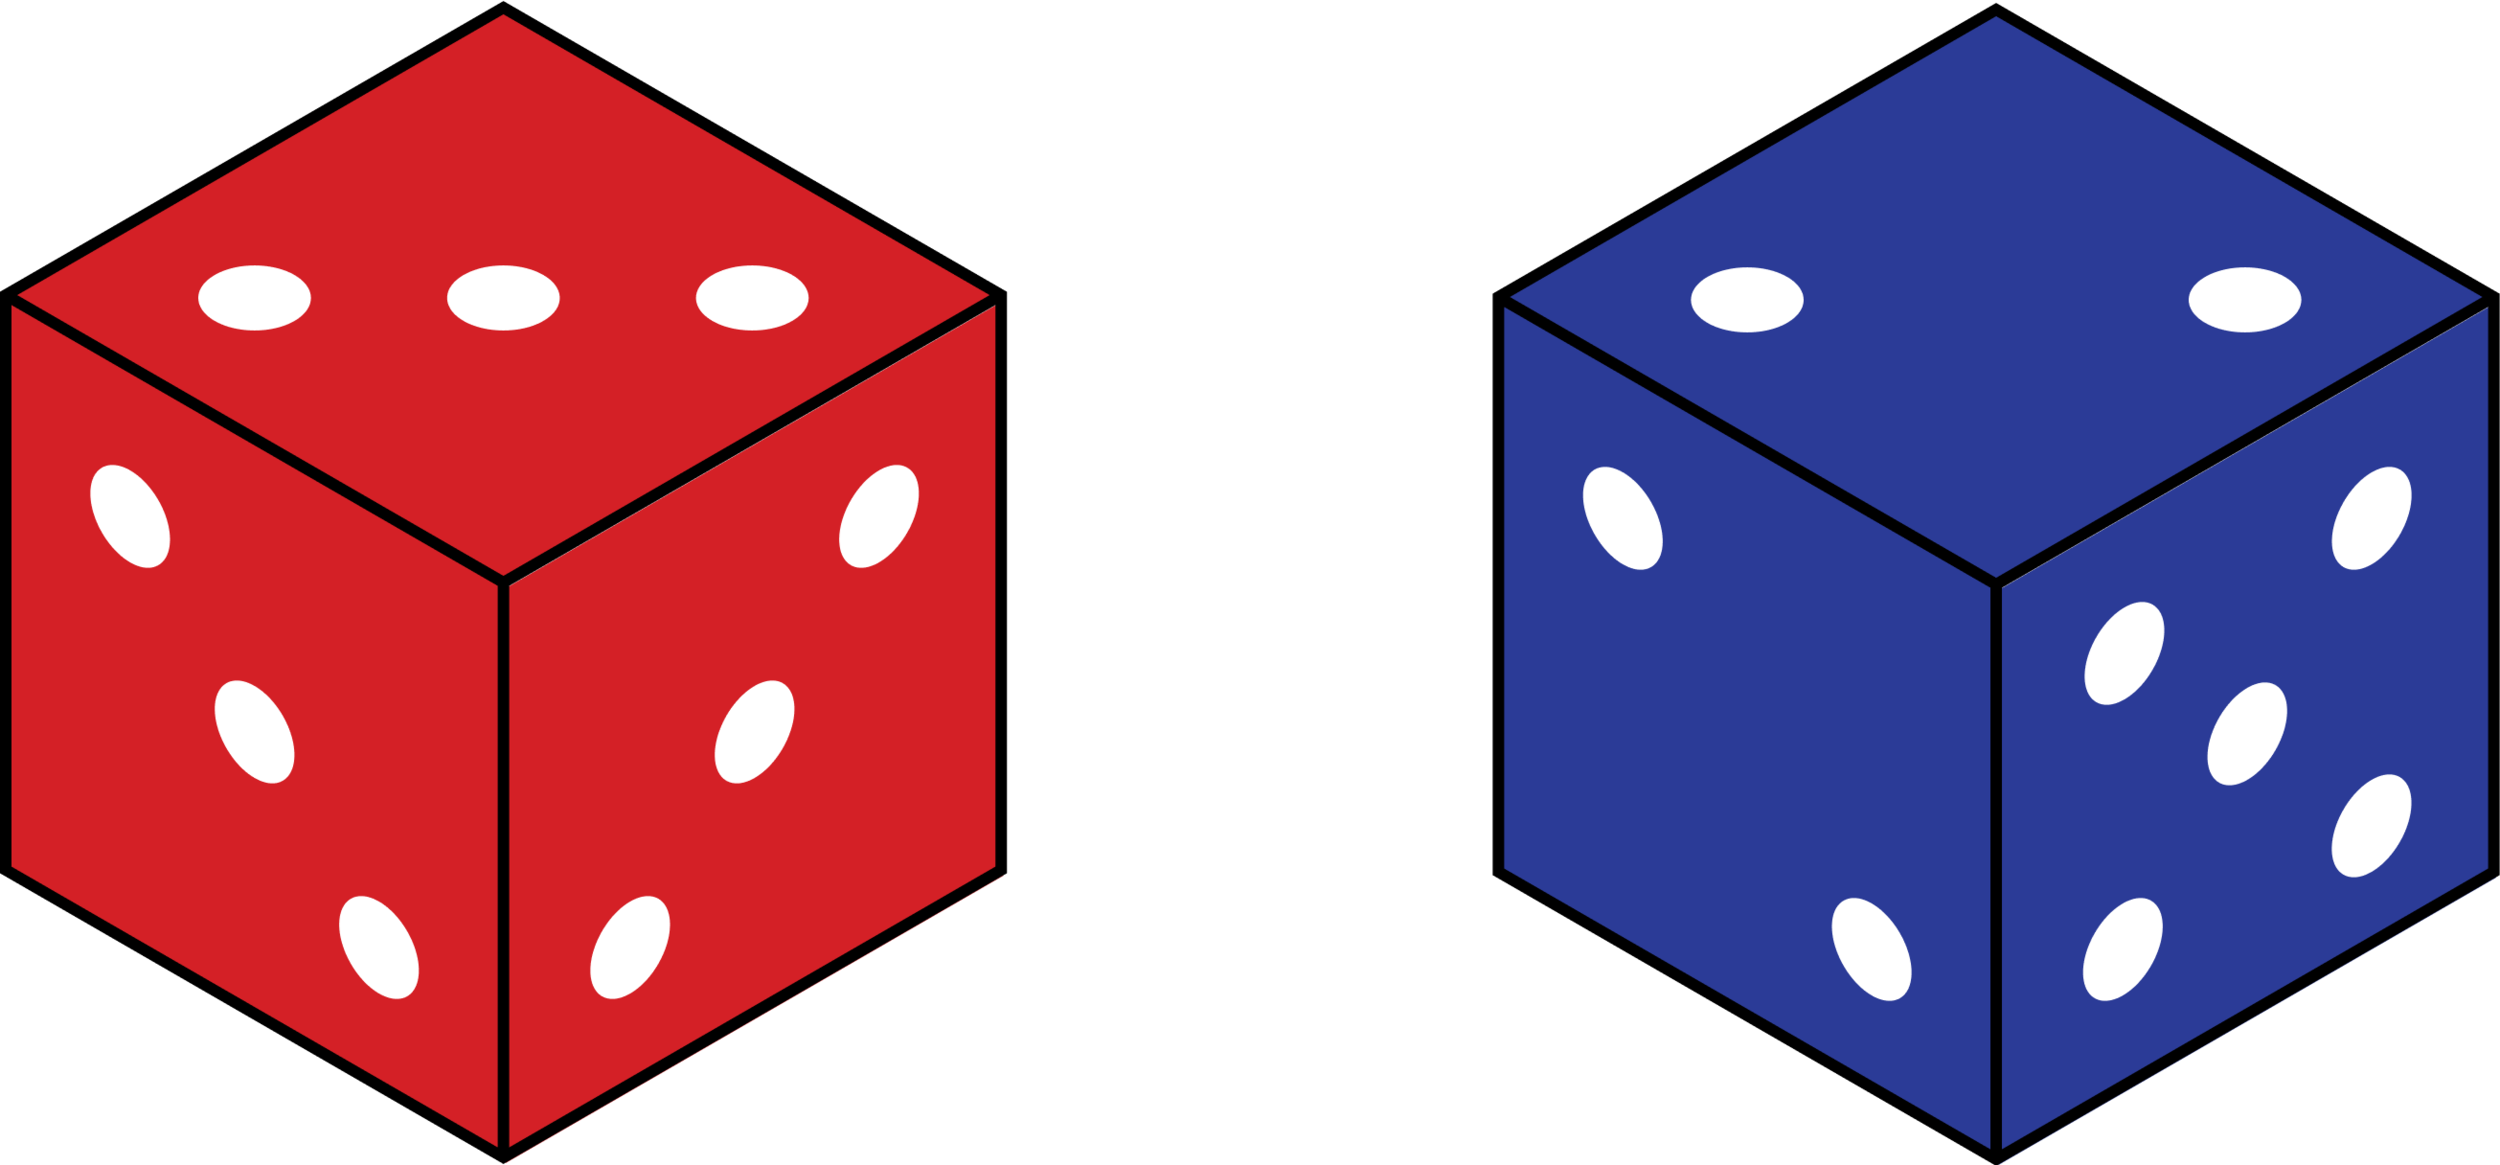 Learn Just What a Dice Looks Like